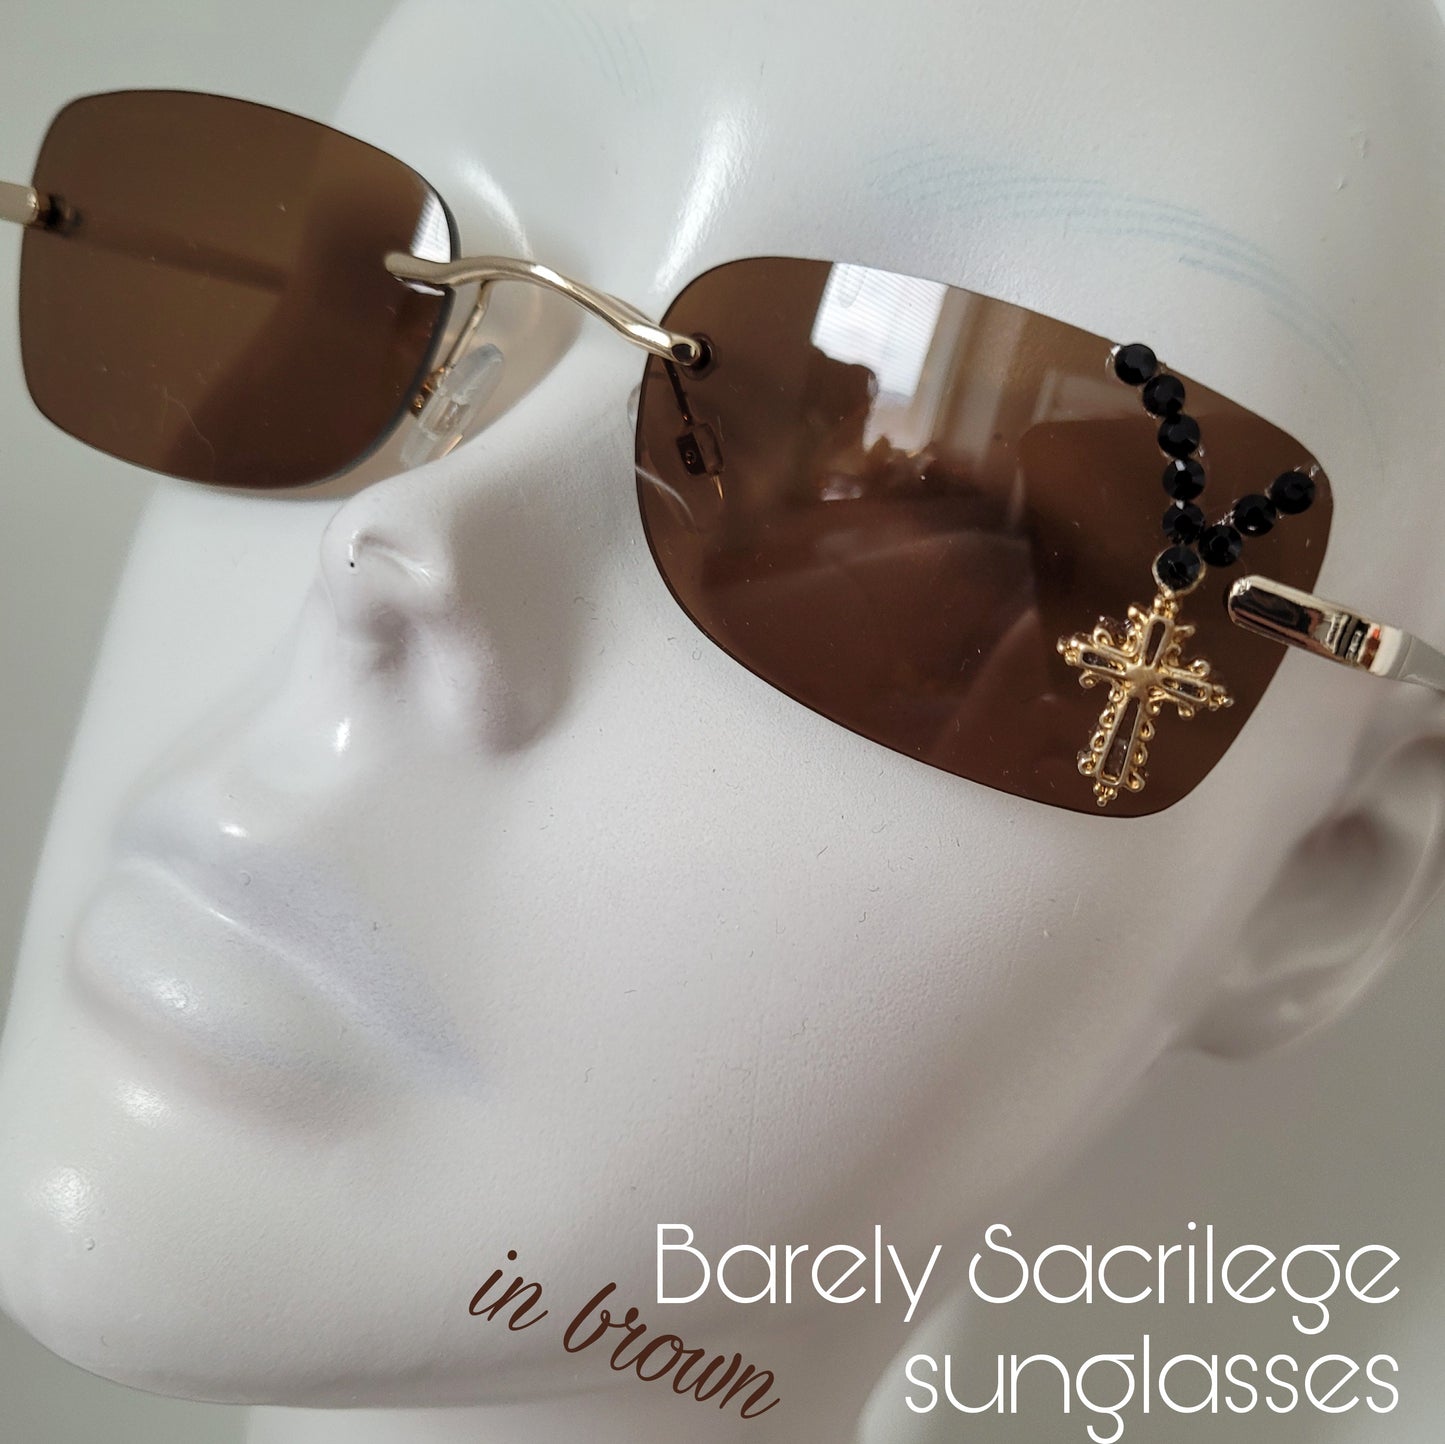 Sacrilegious Collection: The Barely Sacrilege Sunglasses, limited edition rectangular unisex sunnies in brown